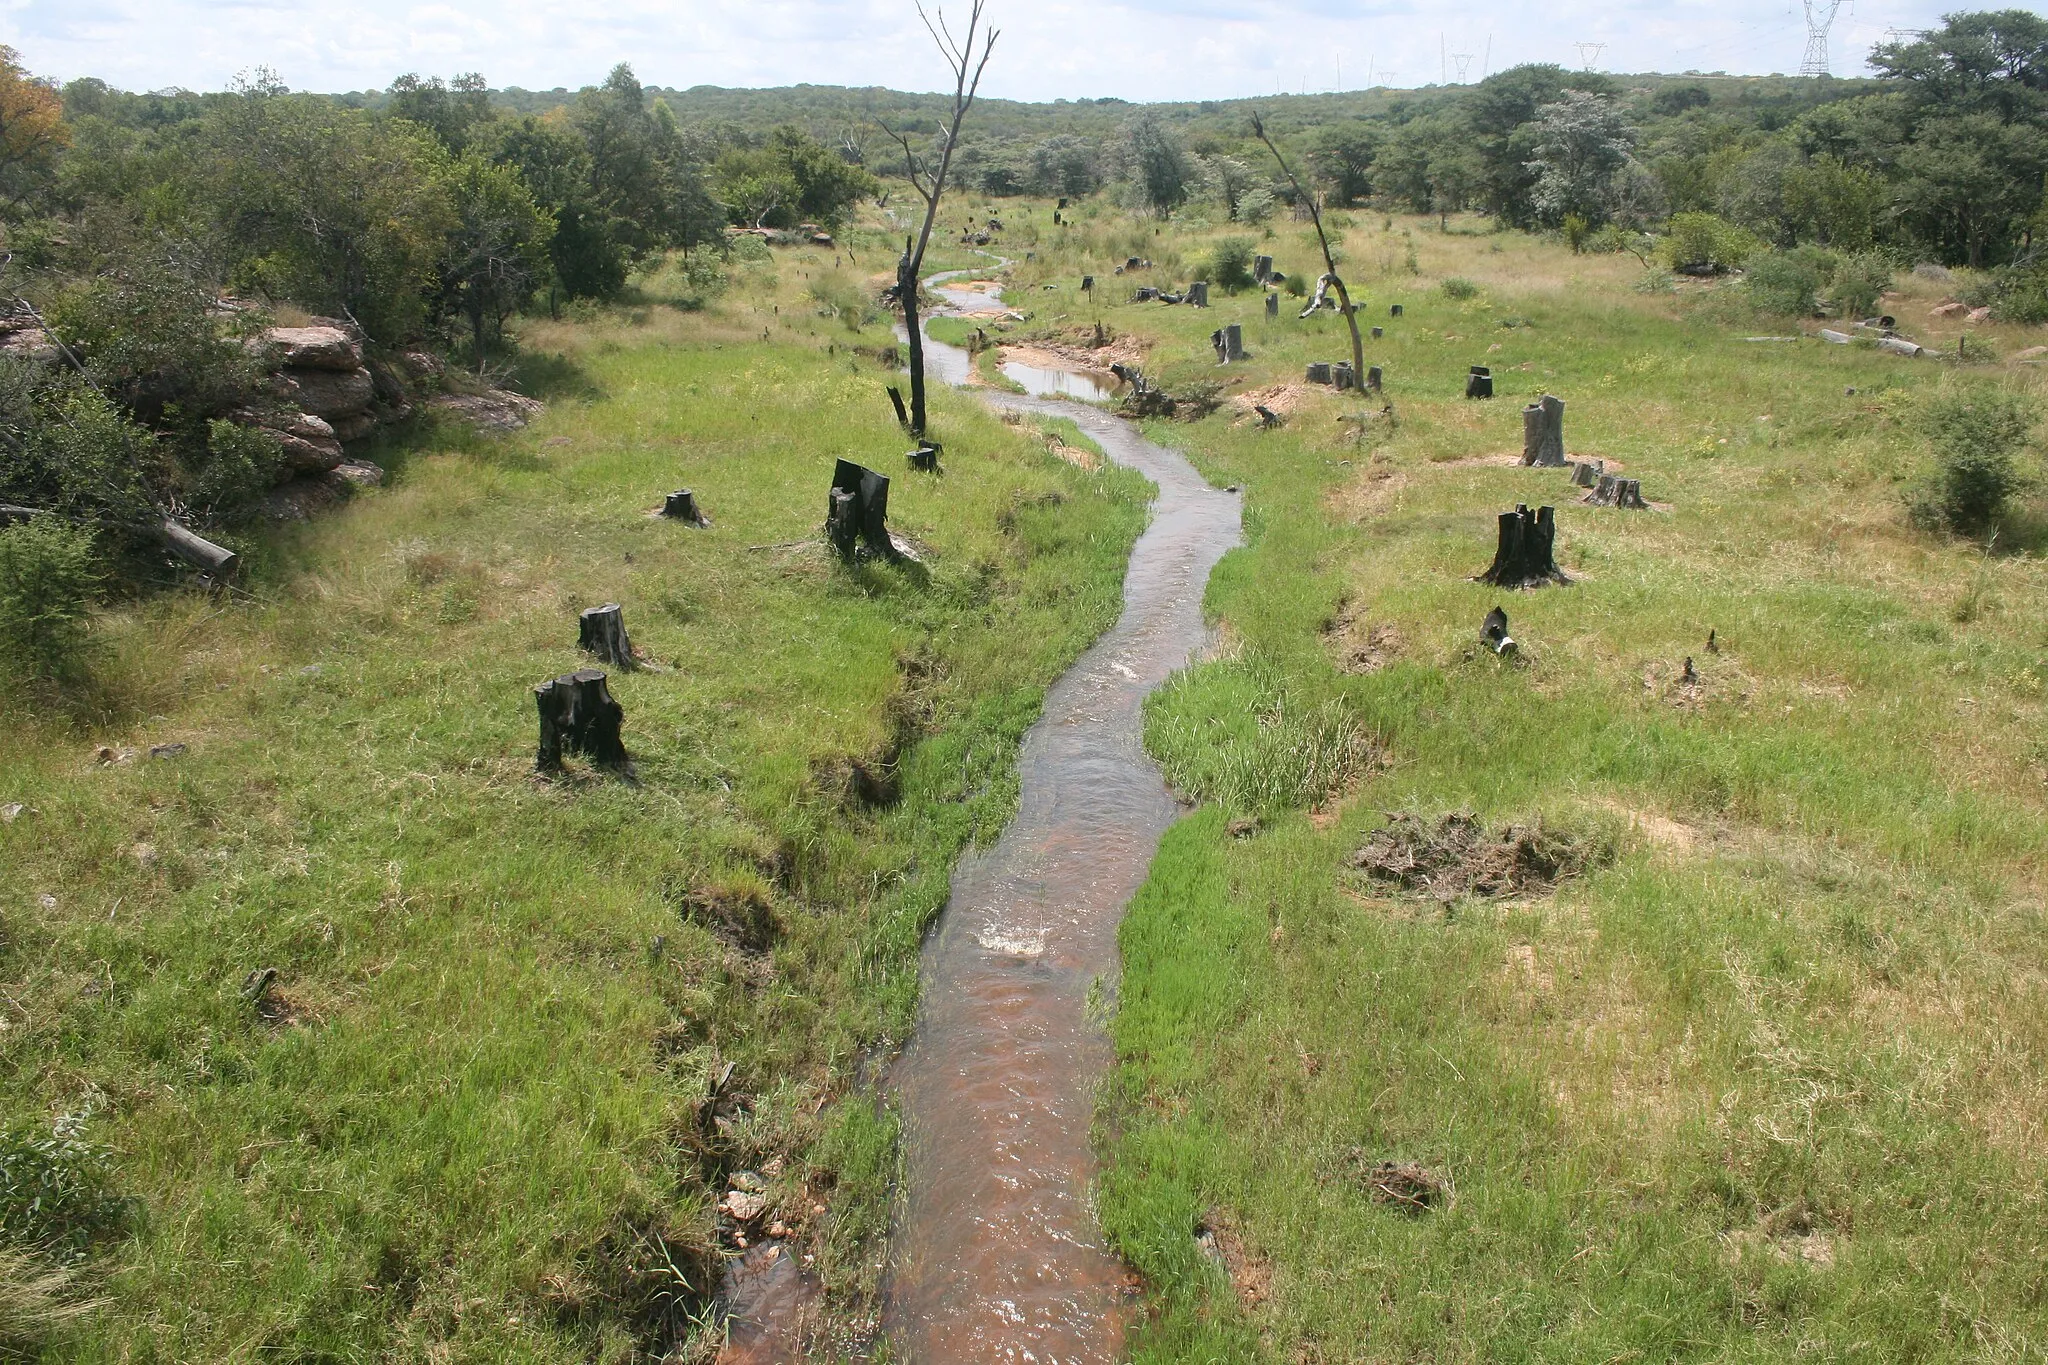 Photo showing: Looking downstream over the Kunap River south of Marken, Limpopo